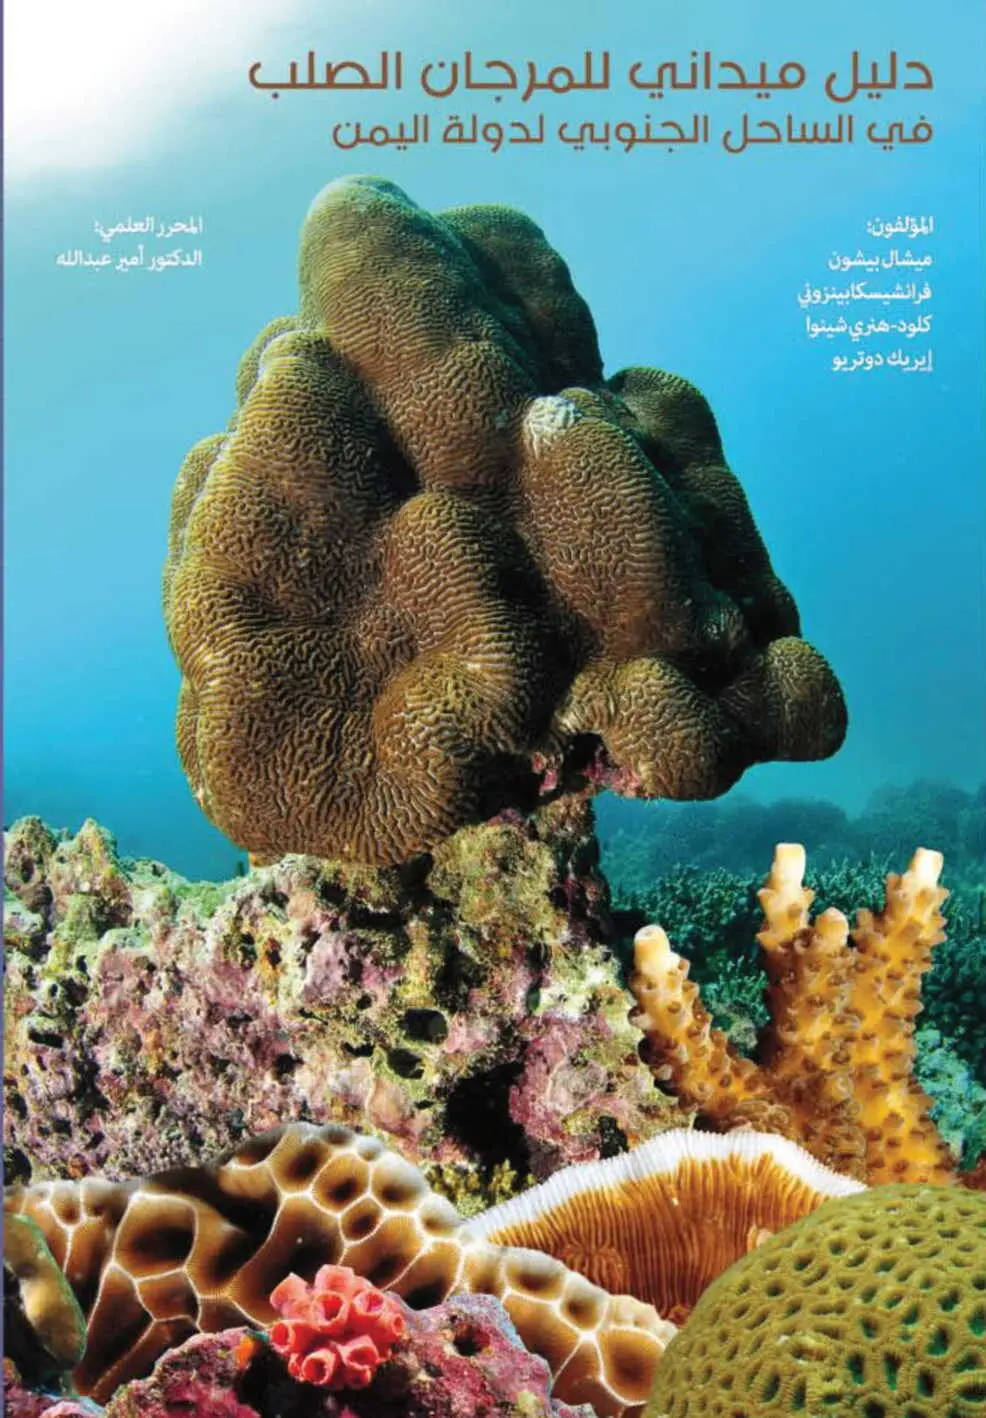 Field guide to the hard corals of the southern coast of Yemen (Arabic version)